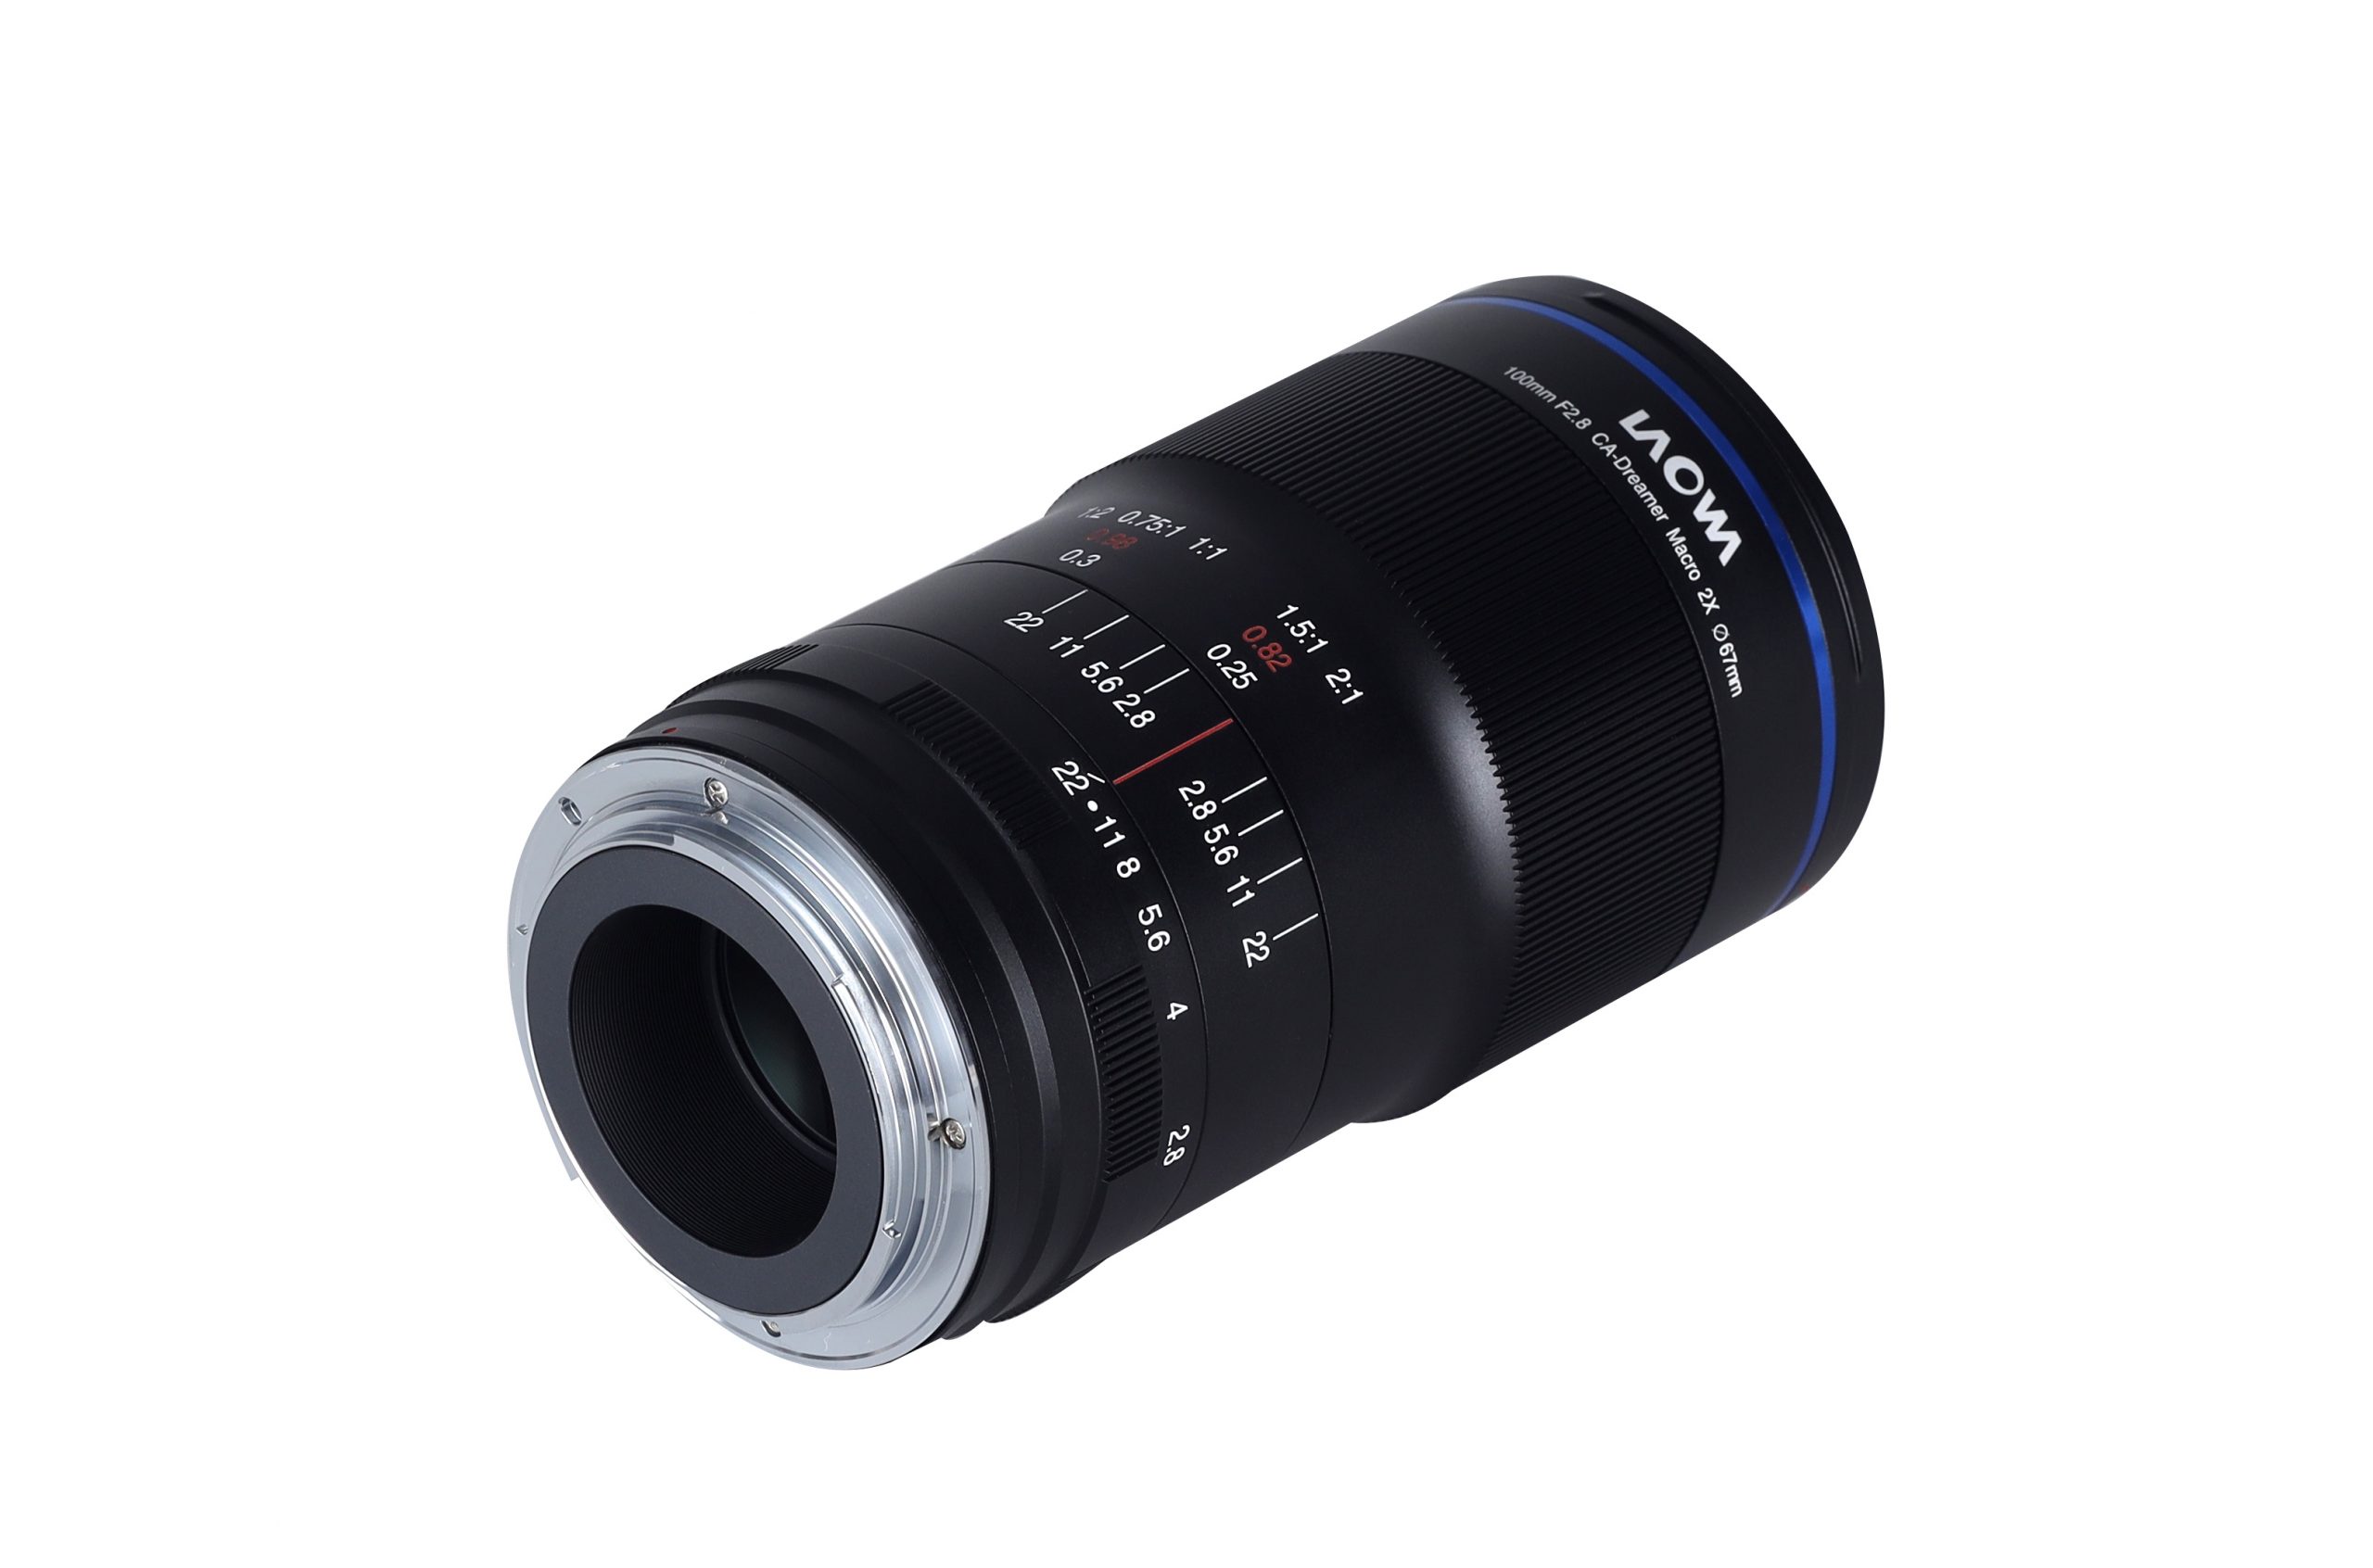 Laowa 100mm f/2.8 2x Ultra Macro APO now available in Canon EF